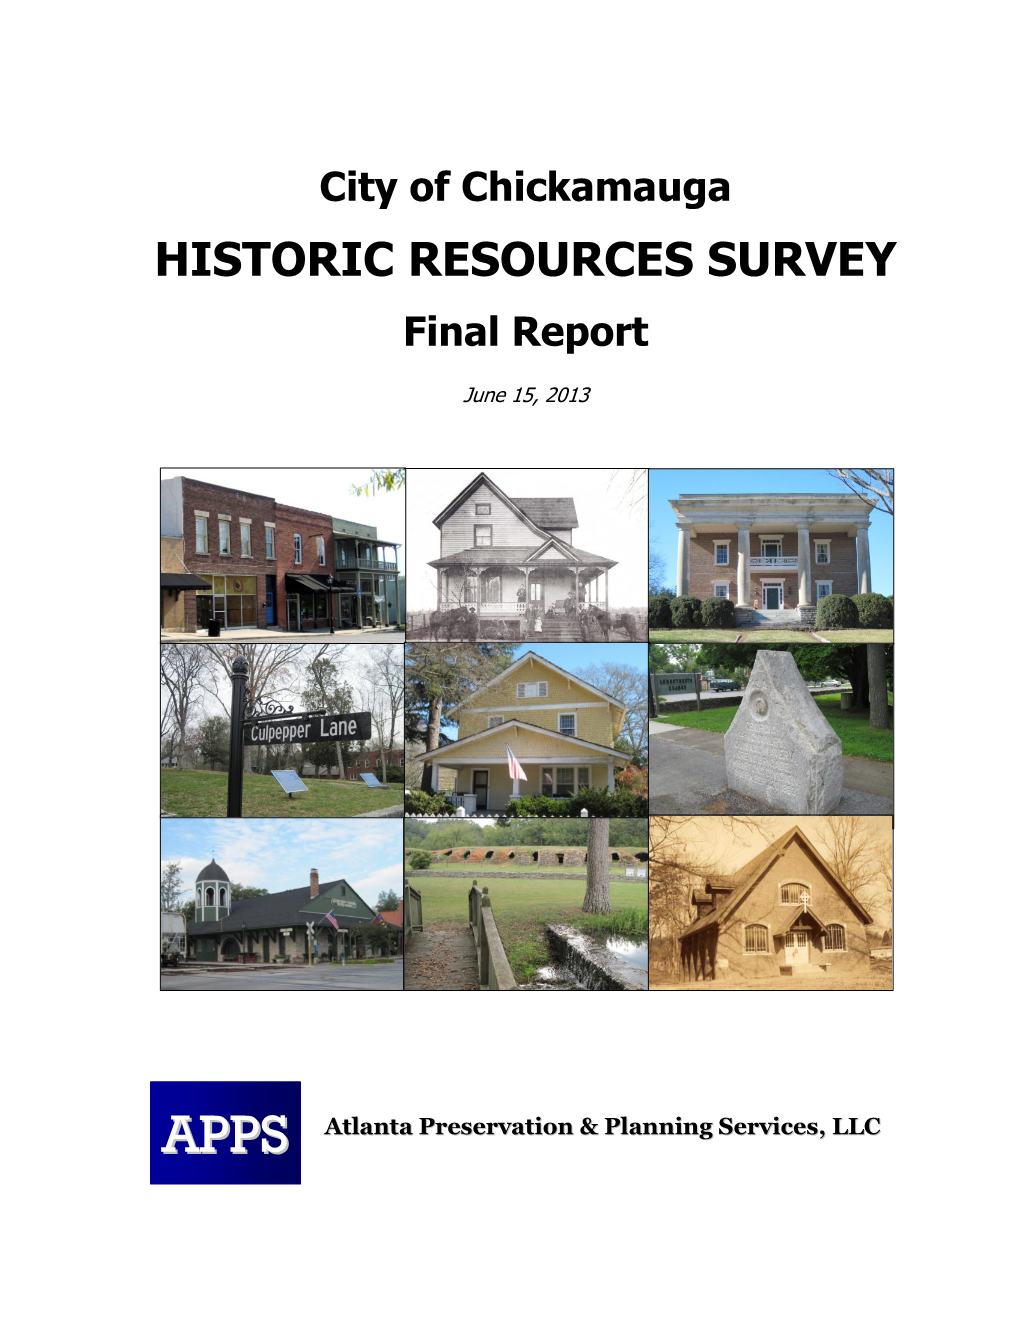 City of Chickamauga Historic Resources Survey Final Report